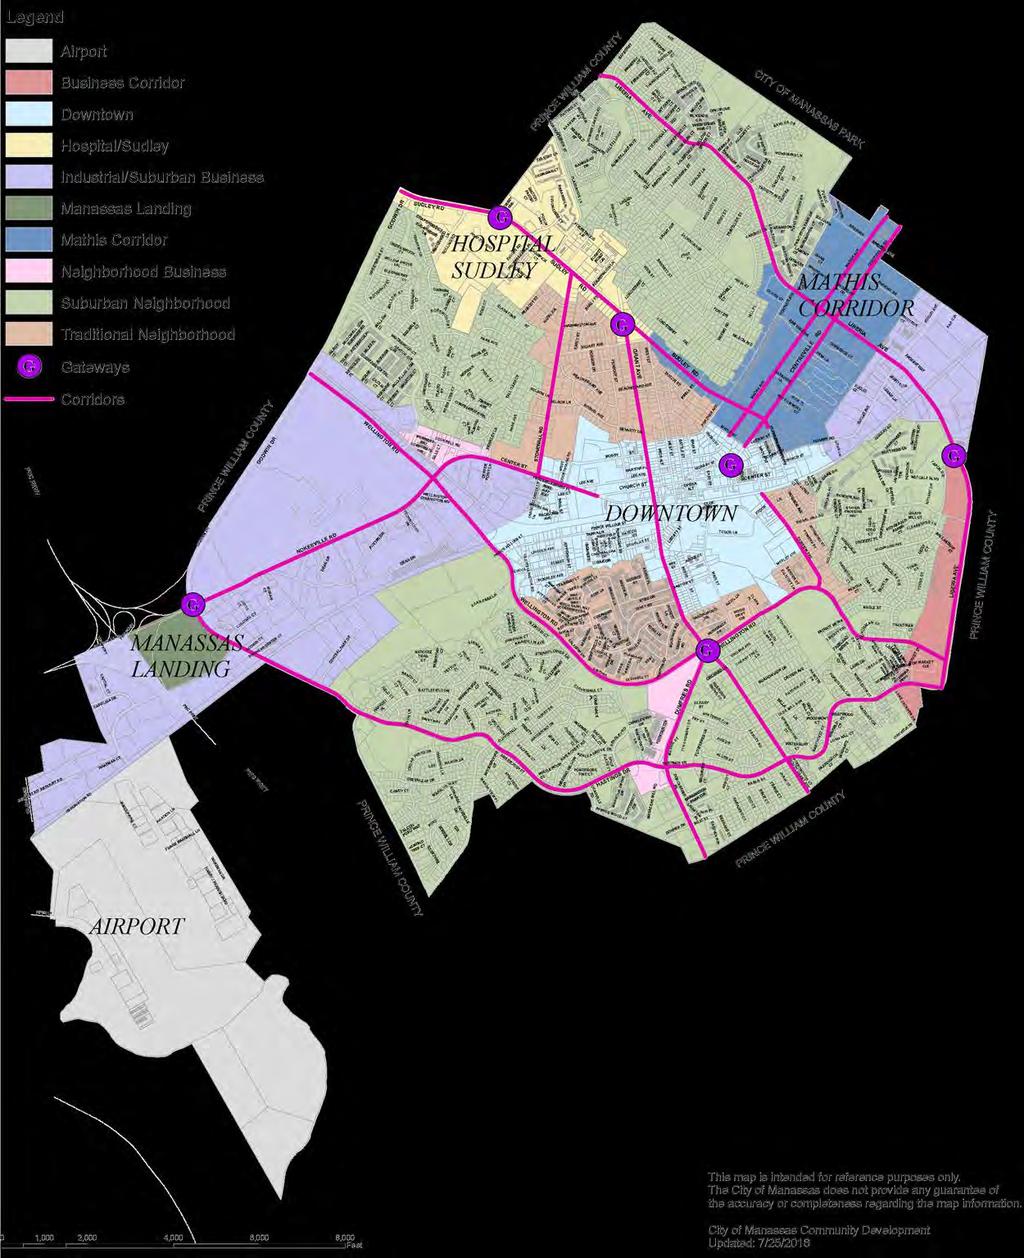 How does the Plan address land use? Character Areas provide land use strategies for the city.